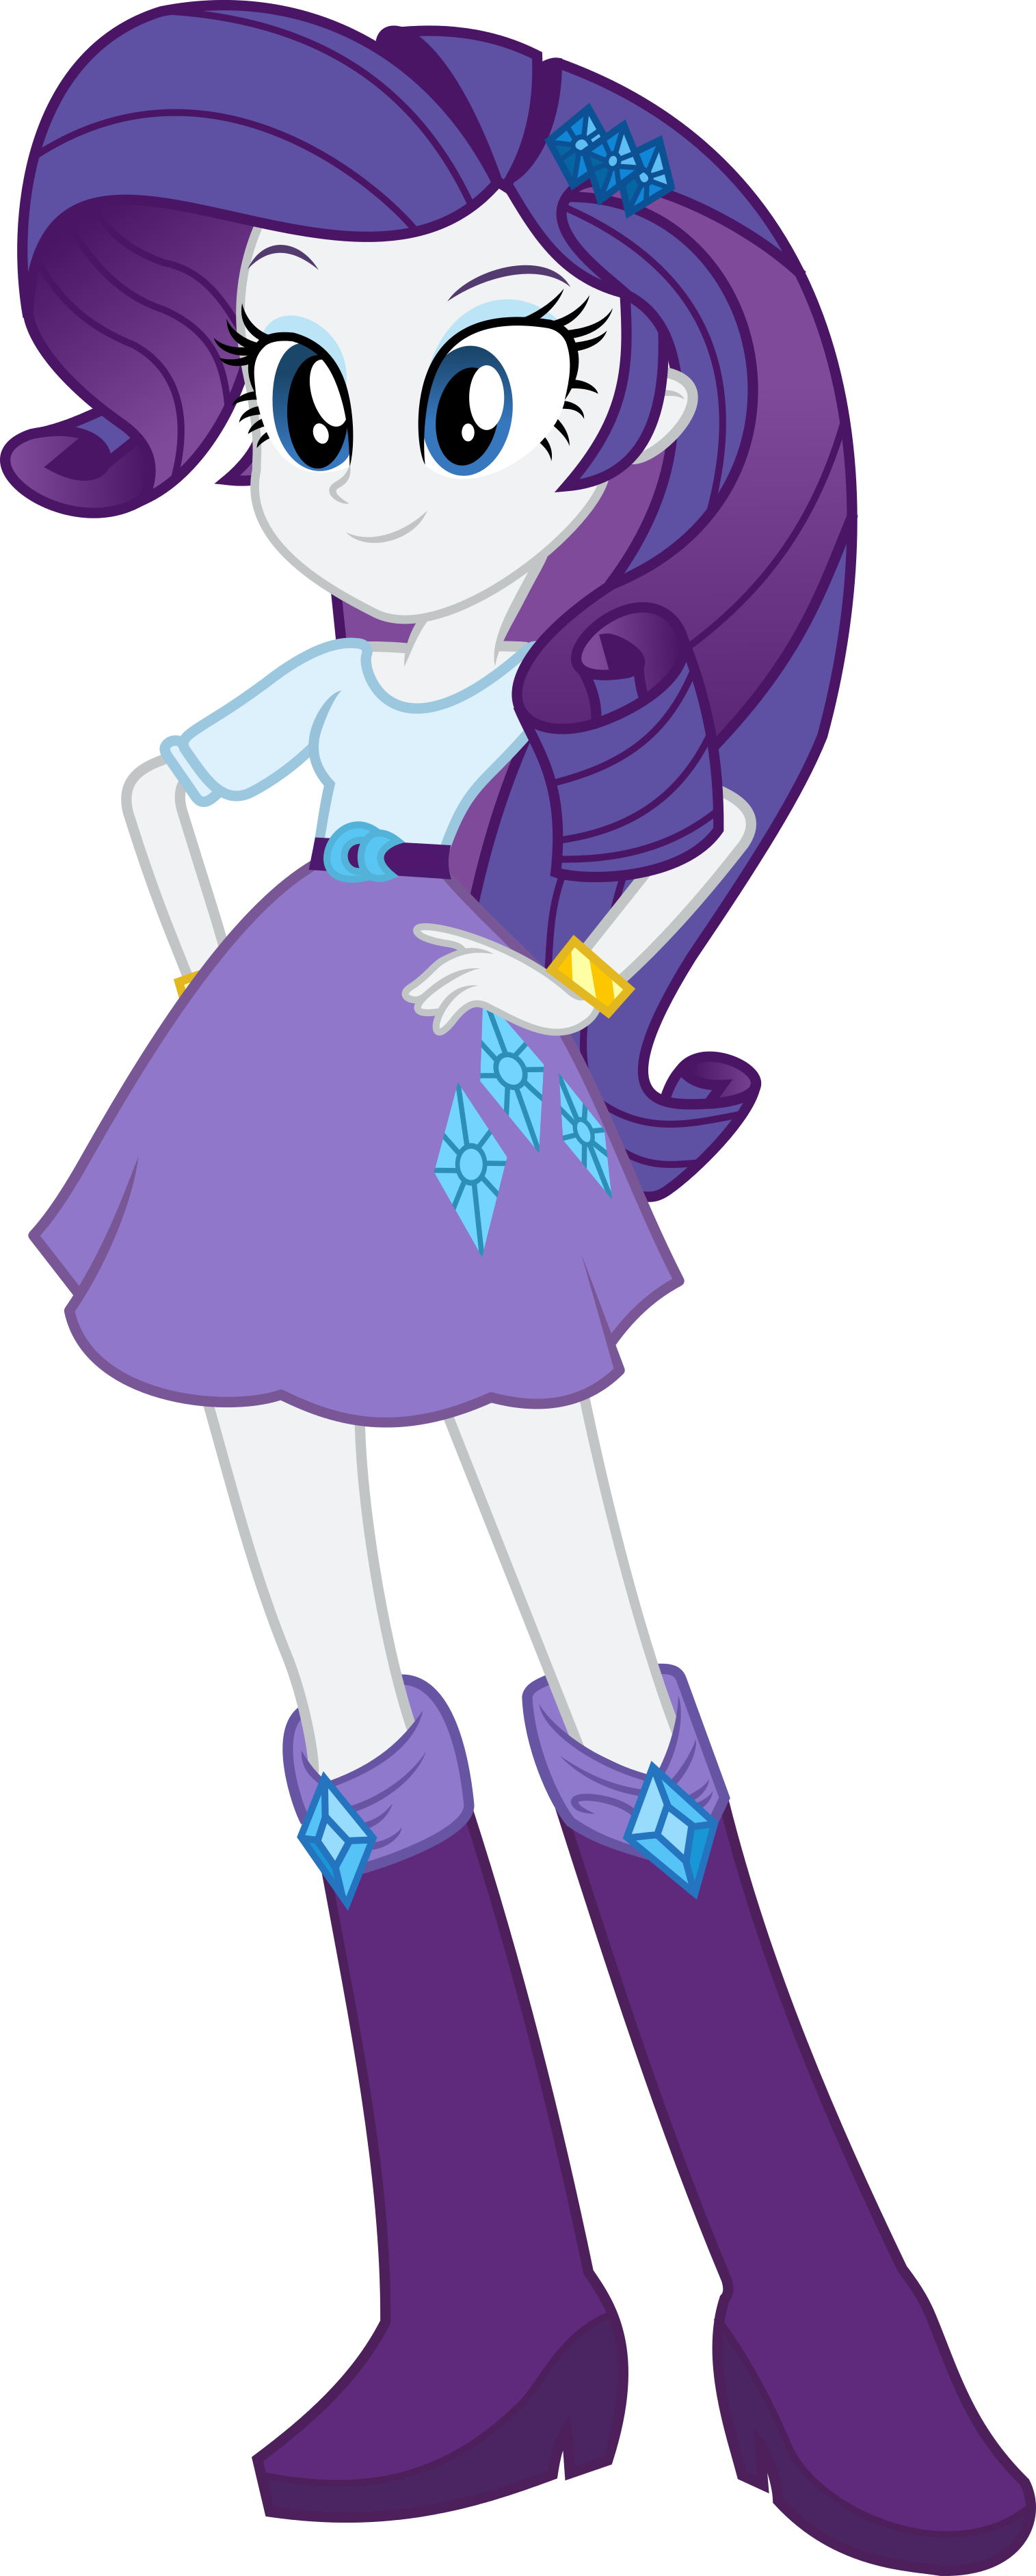 alex gian add photo picture of rarity my little pony